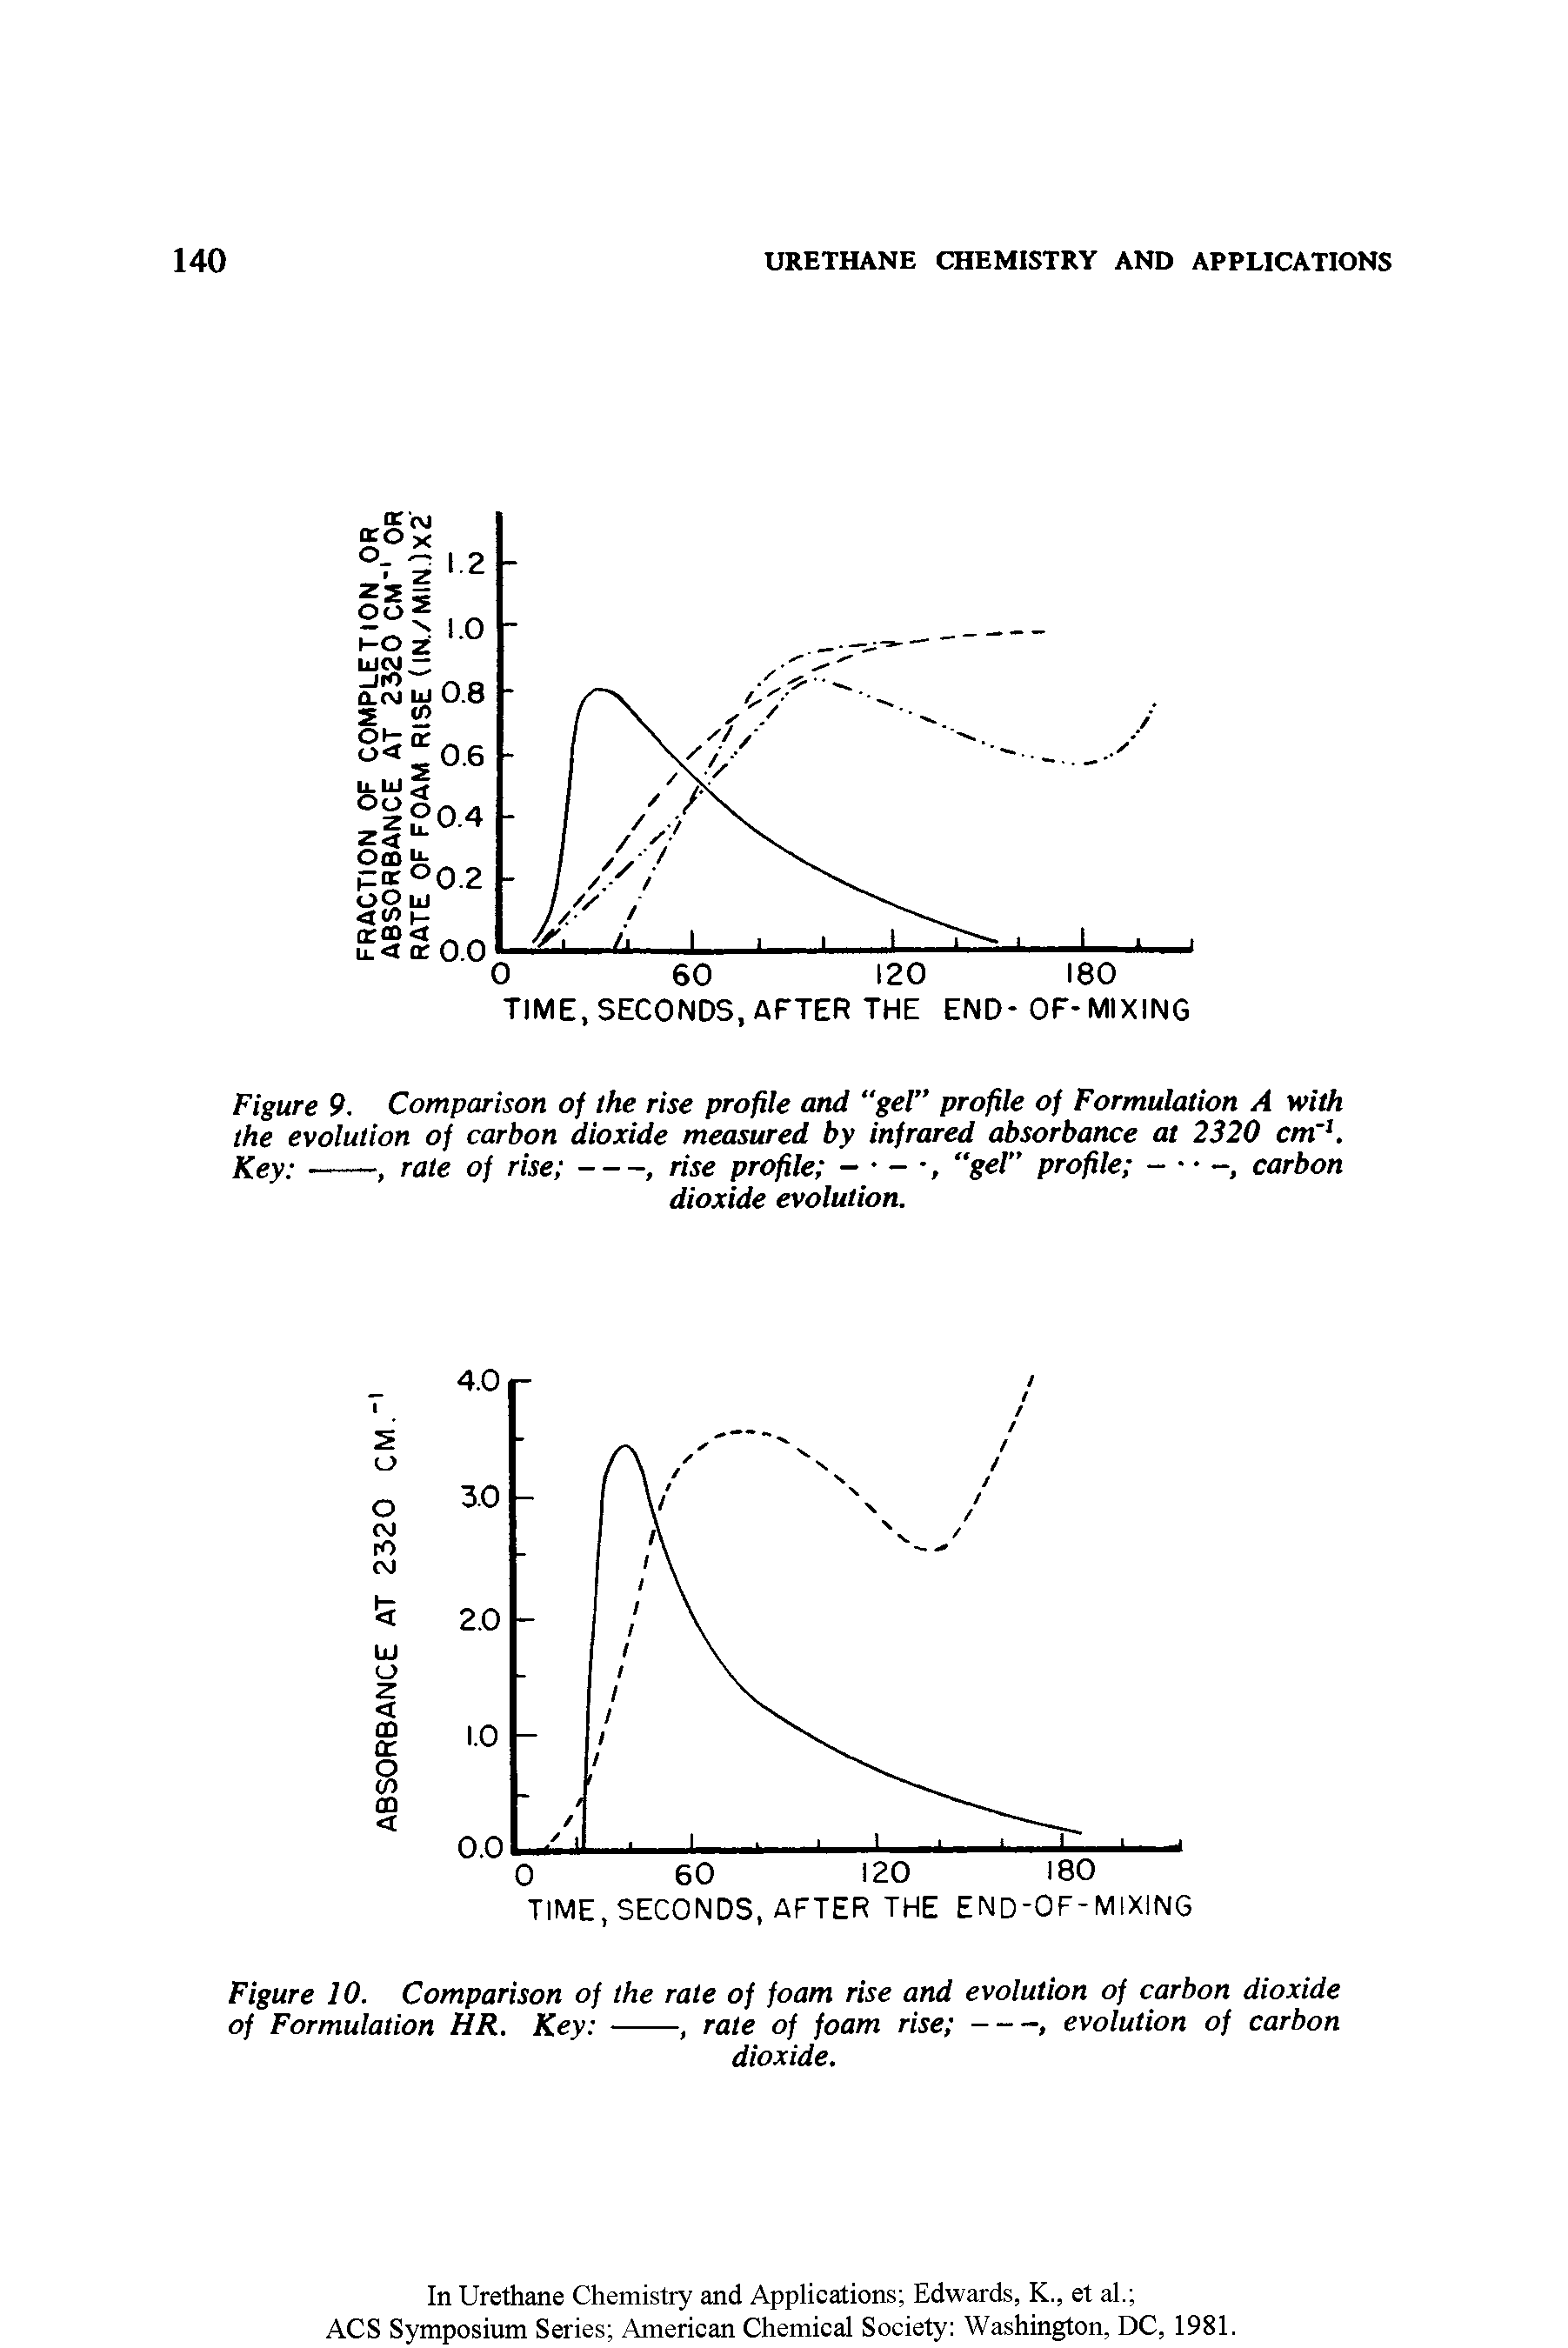 Figure 9. Comparison of the rise profile and gel" profile of Formulation A with the evolution of carbon dioxide measured by infrared absorbance at 2320 cm 1.